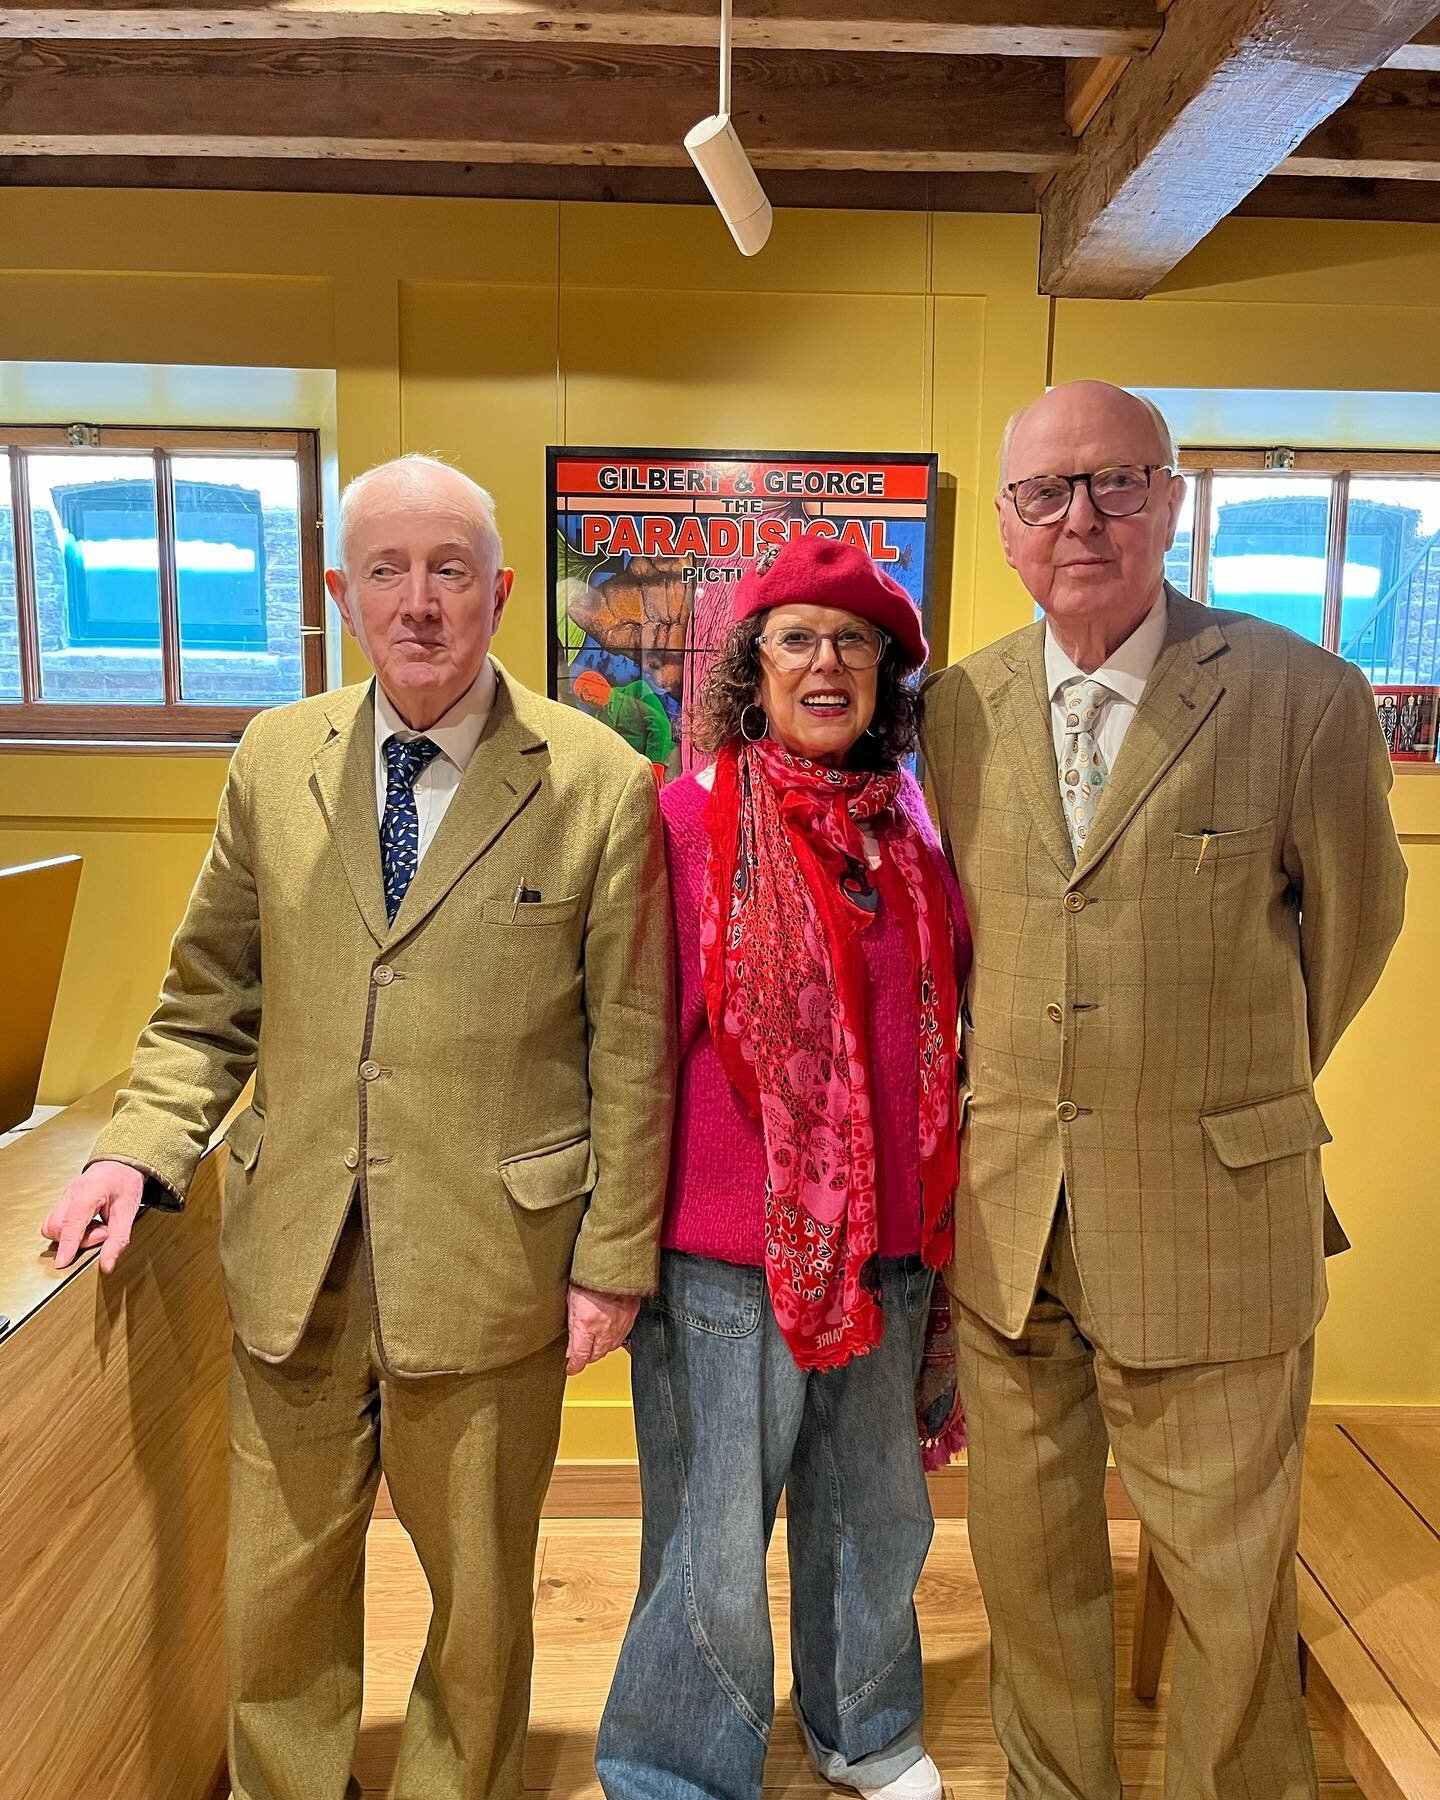 LOOK WHO I MET!!⭐️⭐️2 absolute gentlemen 💕💕 their new gallery is amazing🔥🔥photos don&rsquo;t do the artwork justice&hellip; the size&hellip; the compositions&hellip; the COLOURS👏just fantastic👏💕#gilbertandgeorge #livinglegends #artinlondon #il